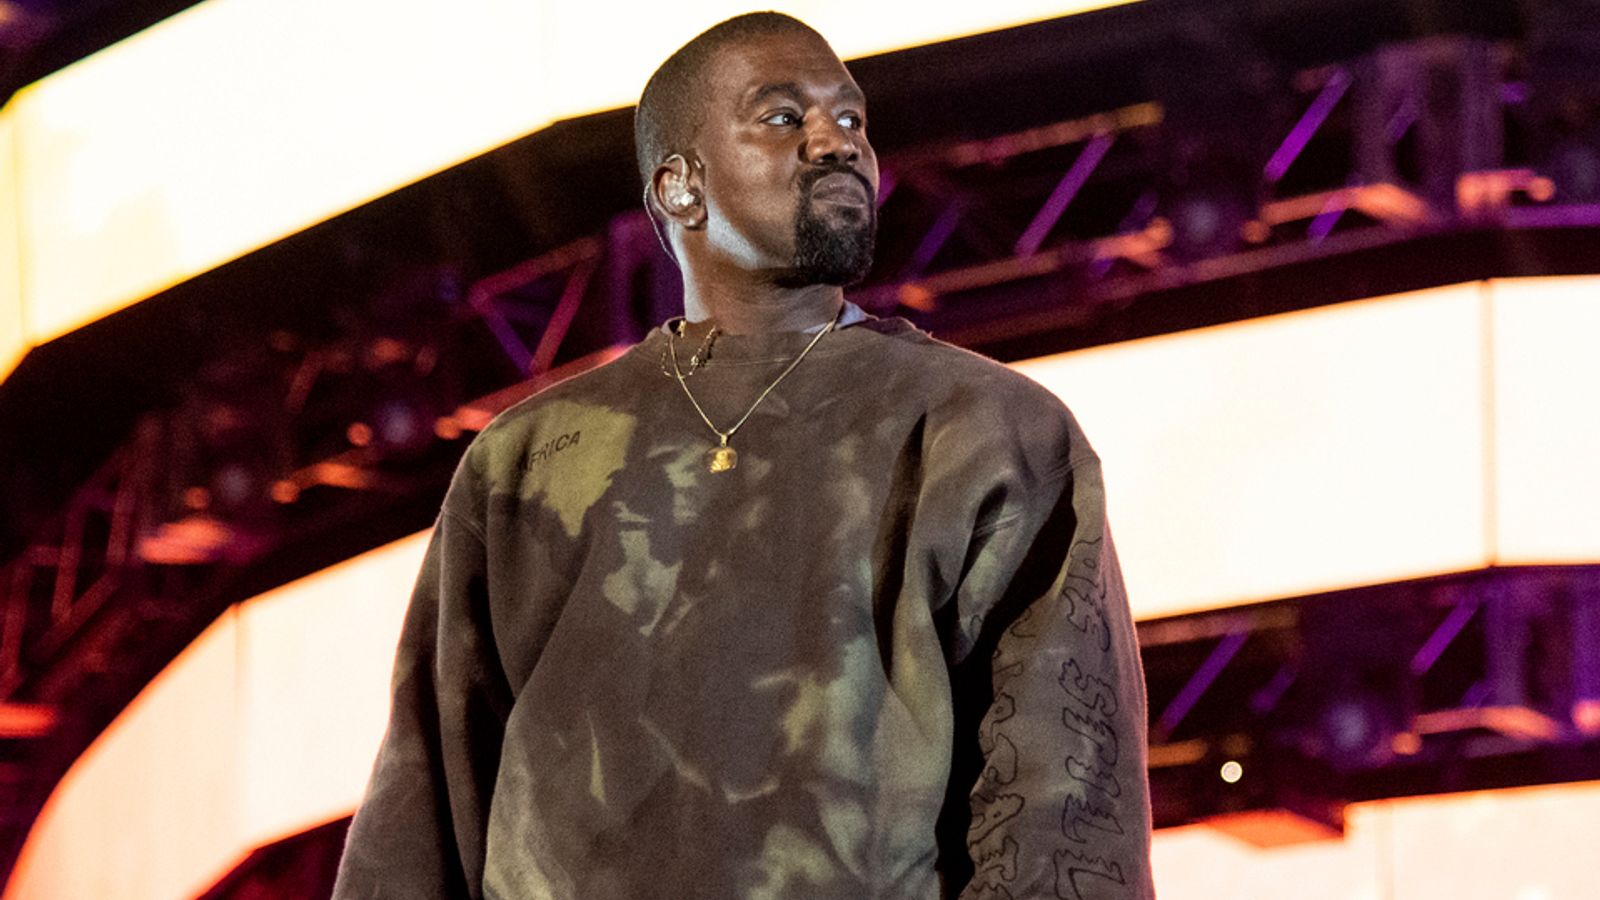 Adidas ends partnership with Kanye West over rapper's 'hateful and dangerous' comments - as Gap to immediately pull Yeezy products from stores